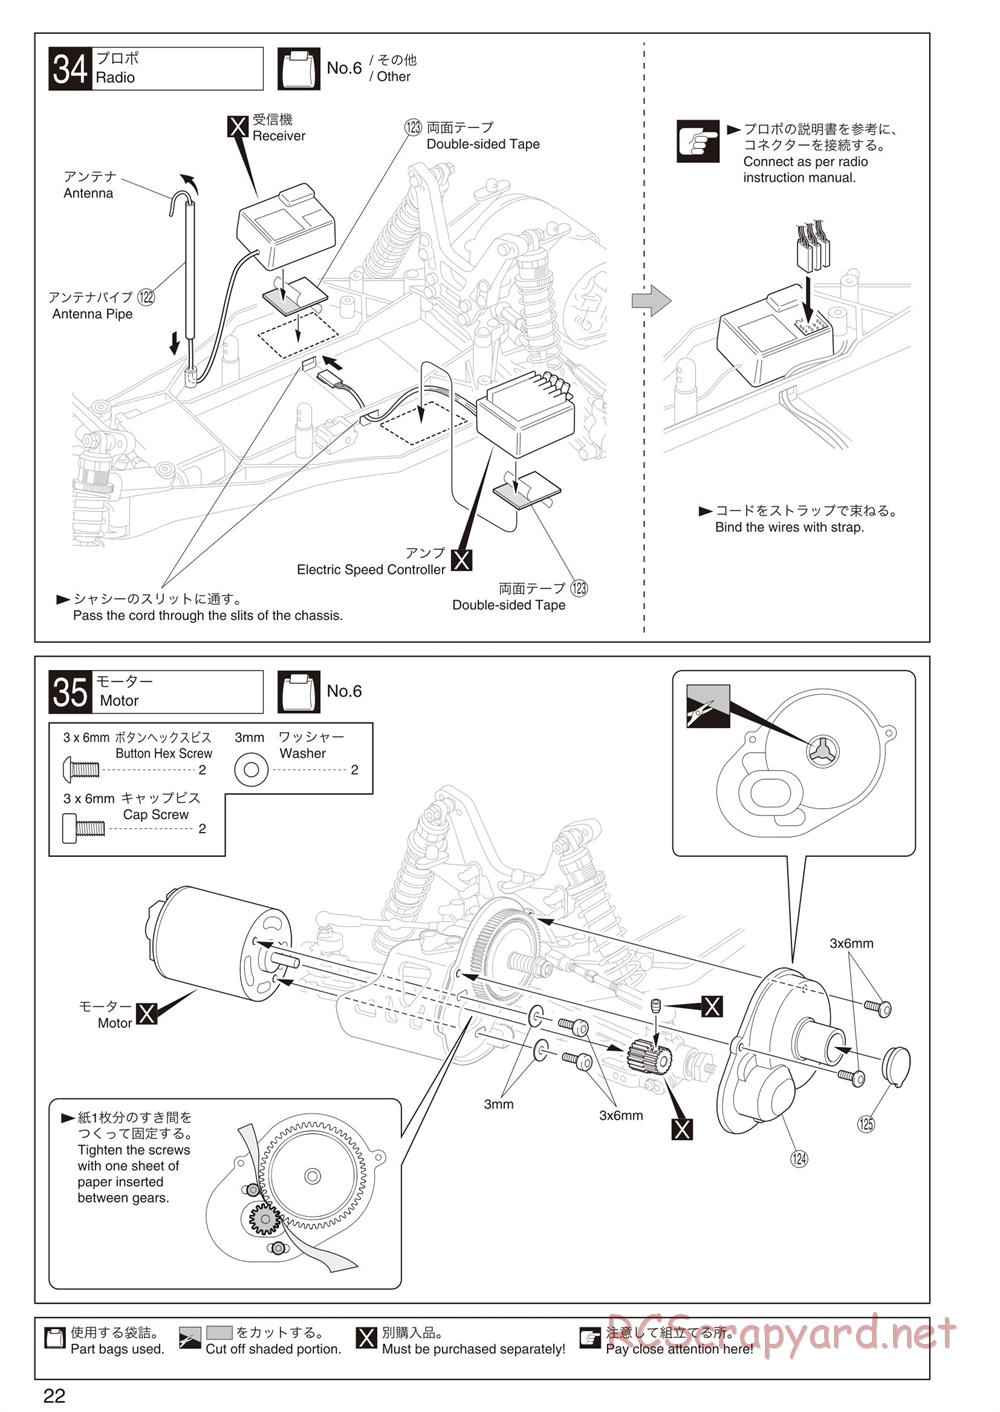 Kyosho - Ultima RB5 SP - Manual - Page 22